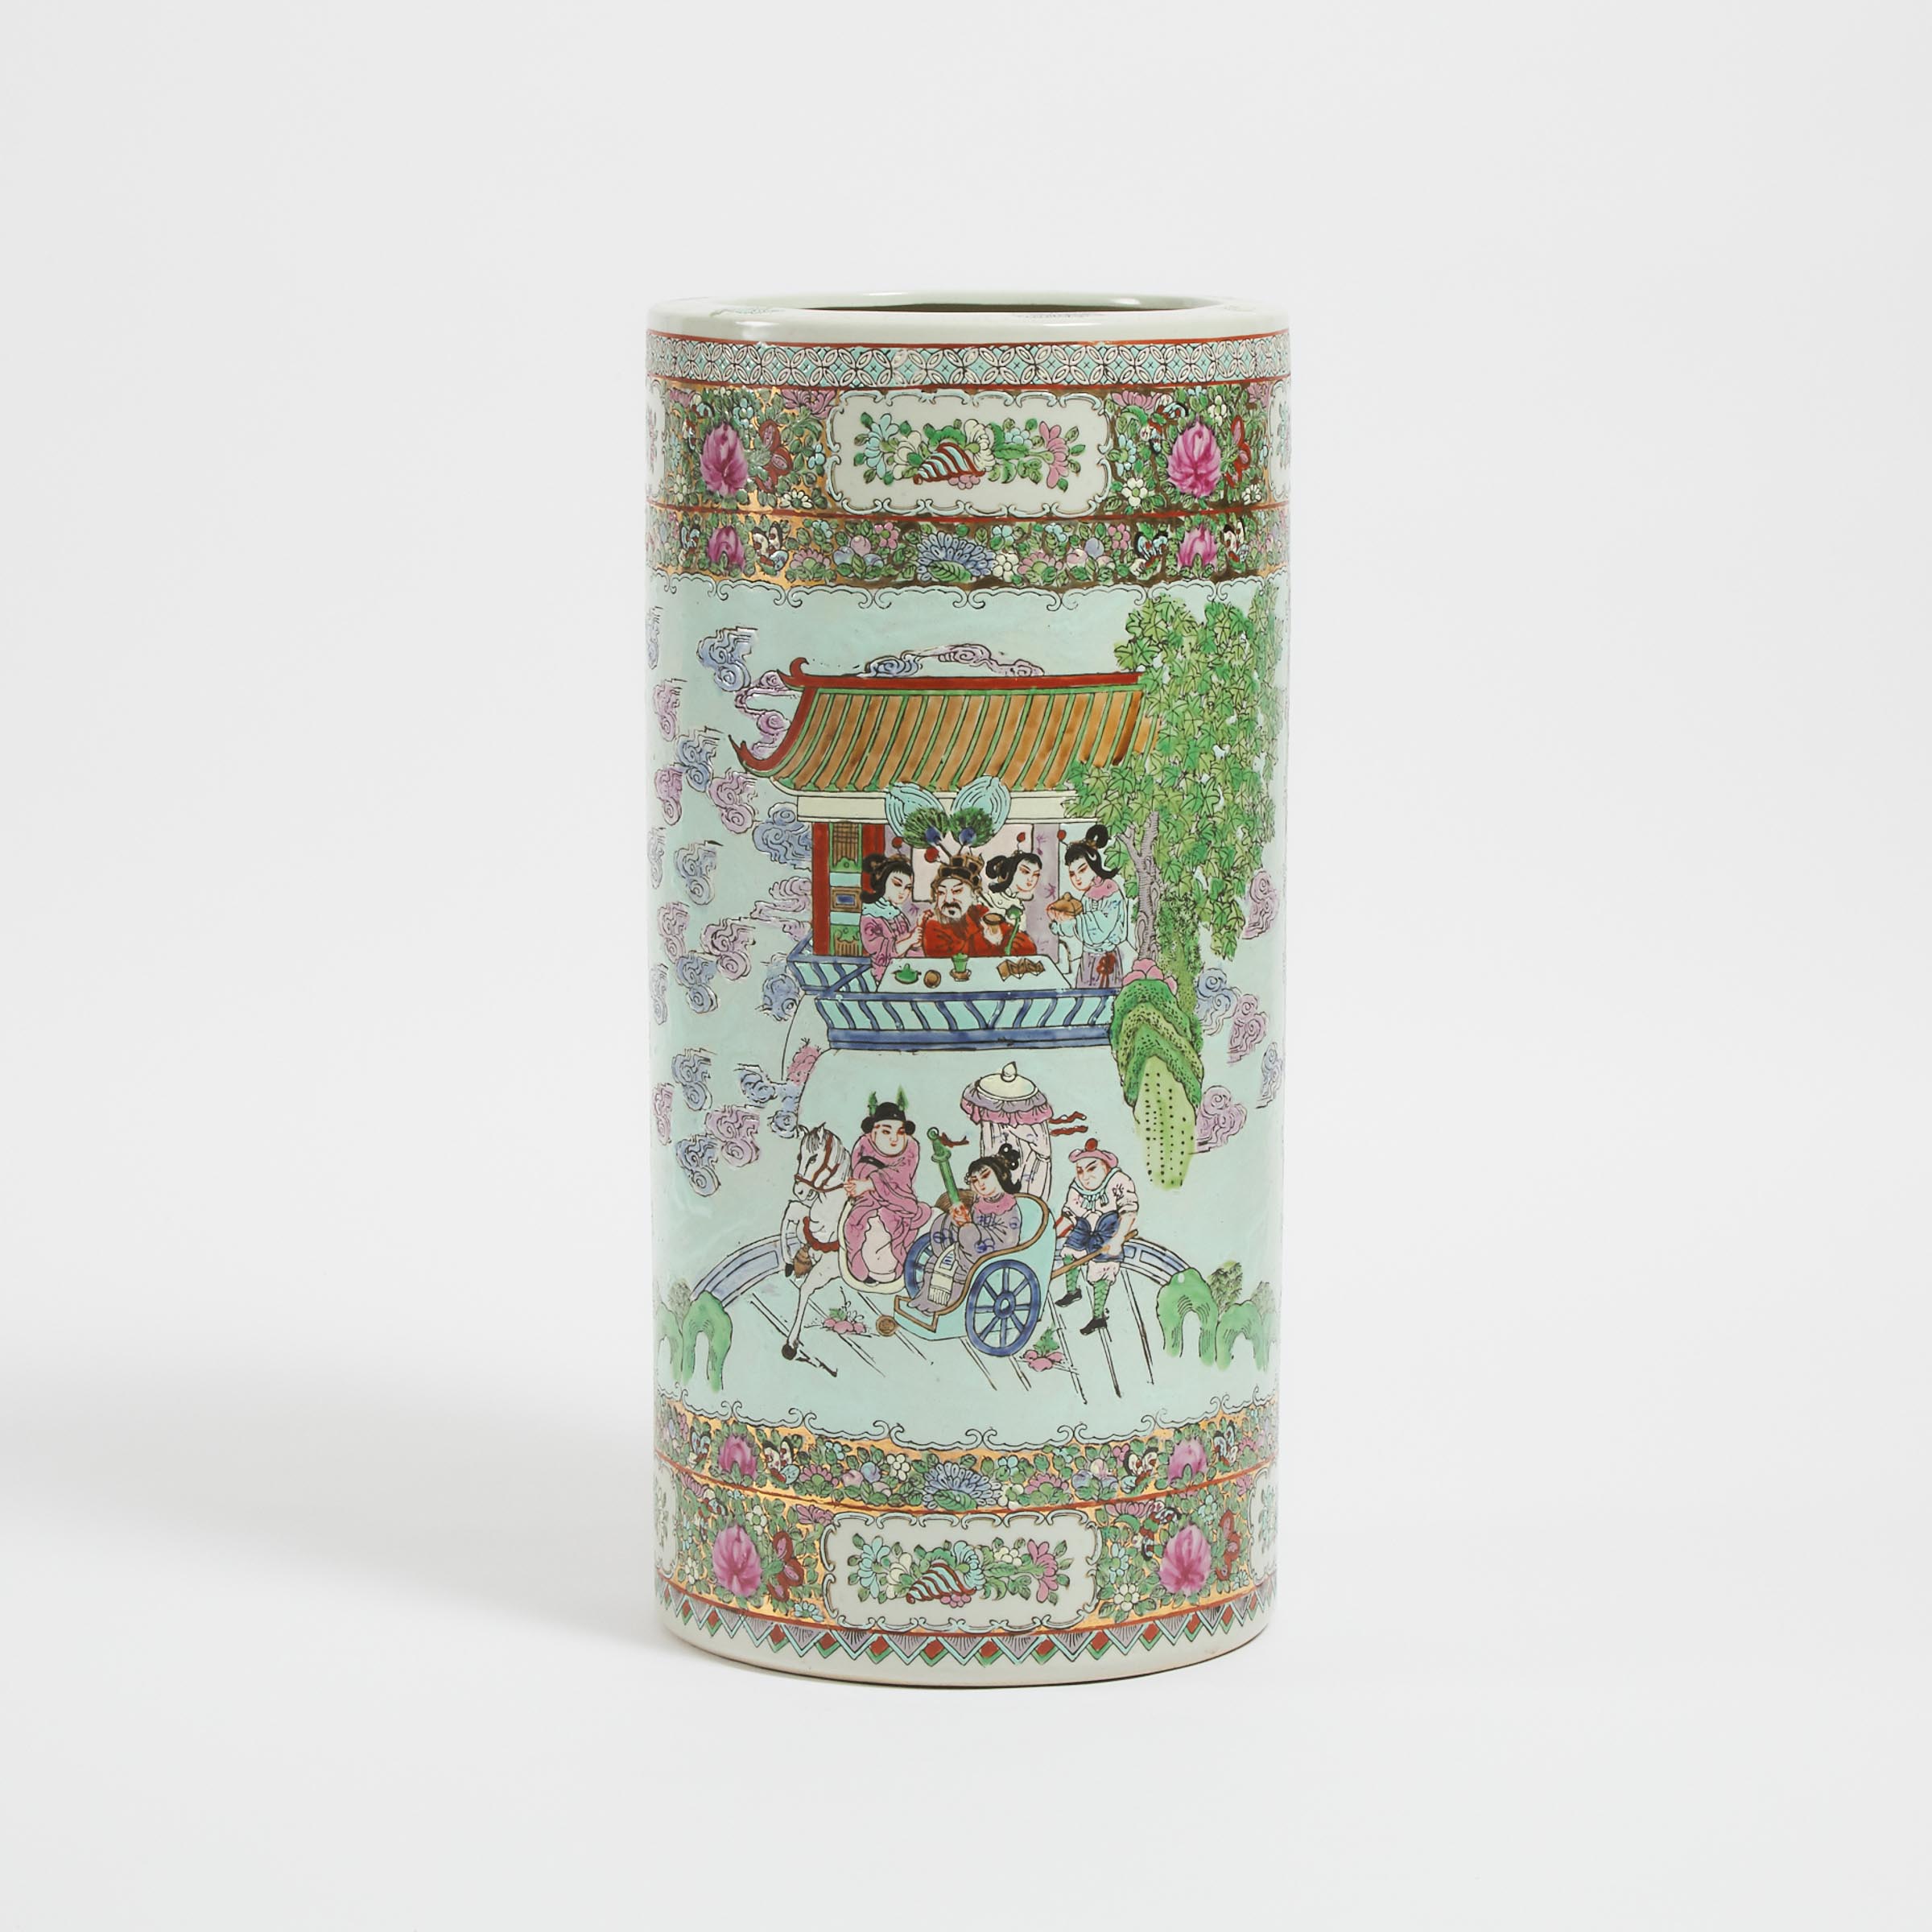 A Canton Famille Rose Style Porcelain Umbrella Stand, 20th Century